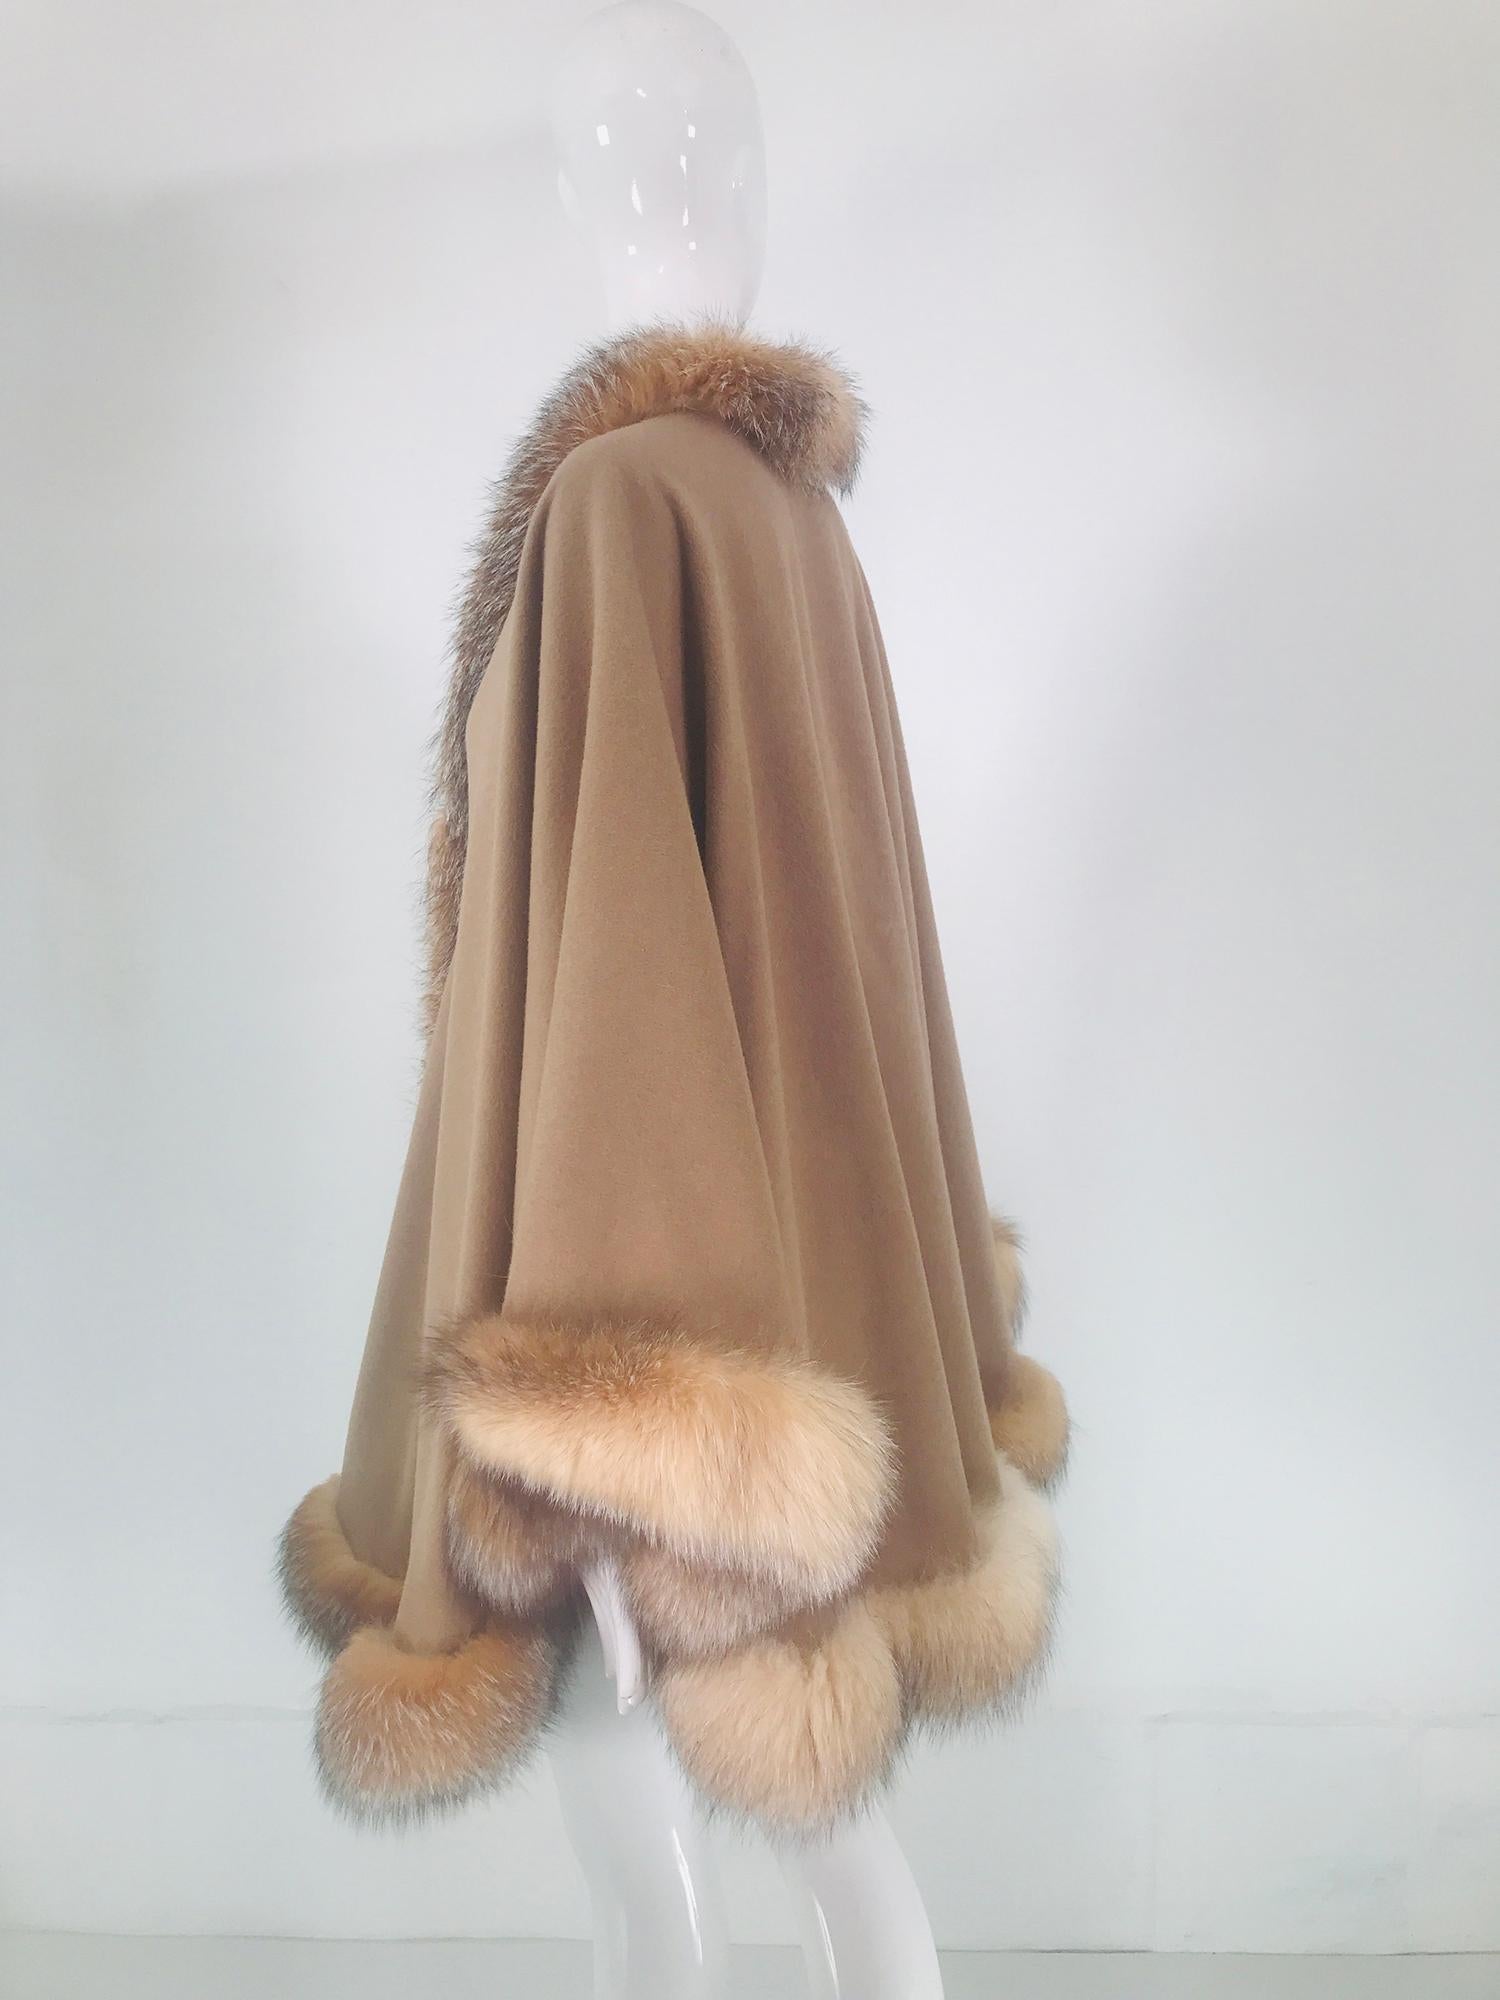 Sprung Freres Paris Red Fox Wool/Cashmere Reversible Cape Grey/Camel Tan OS In Good Condition In West Palm Beach, FL